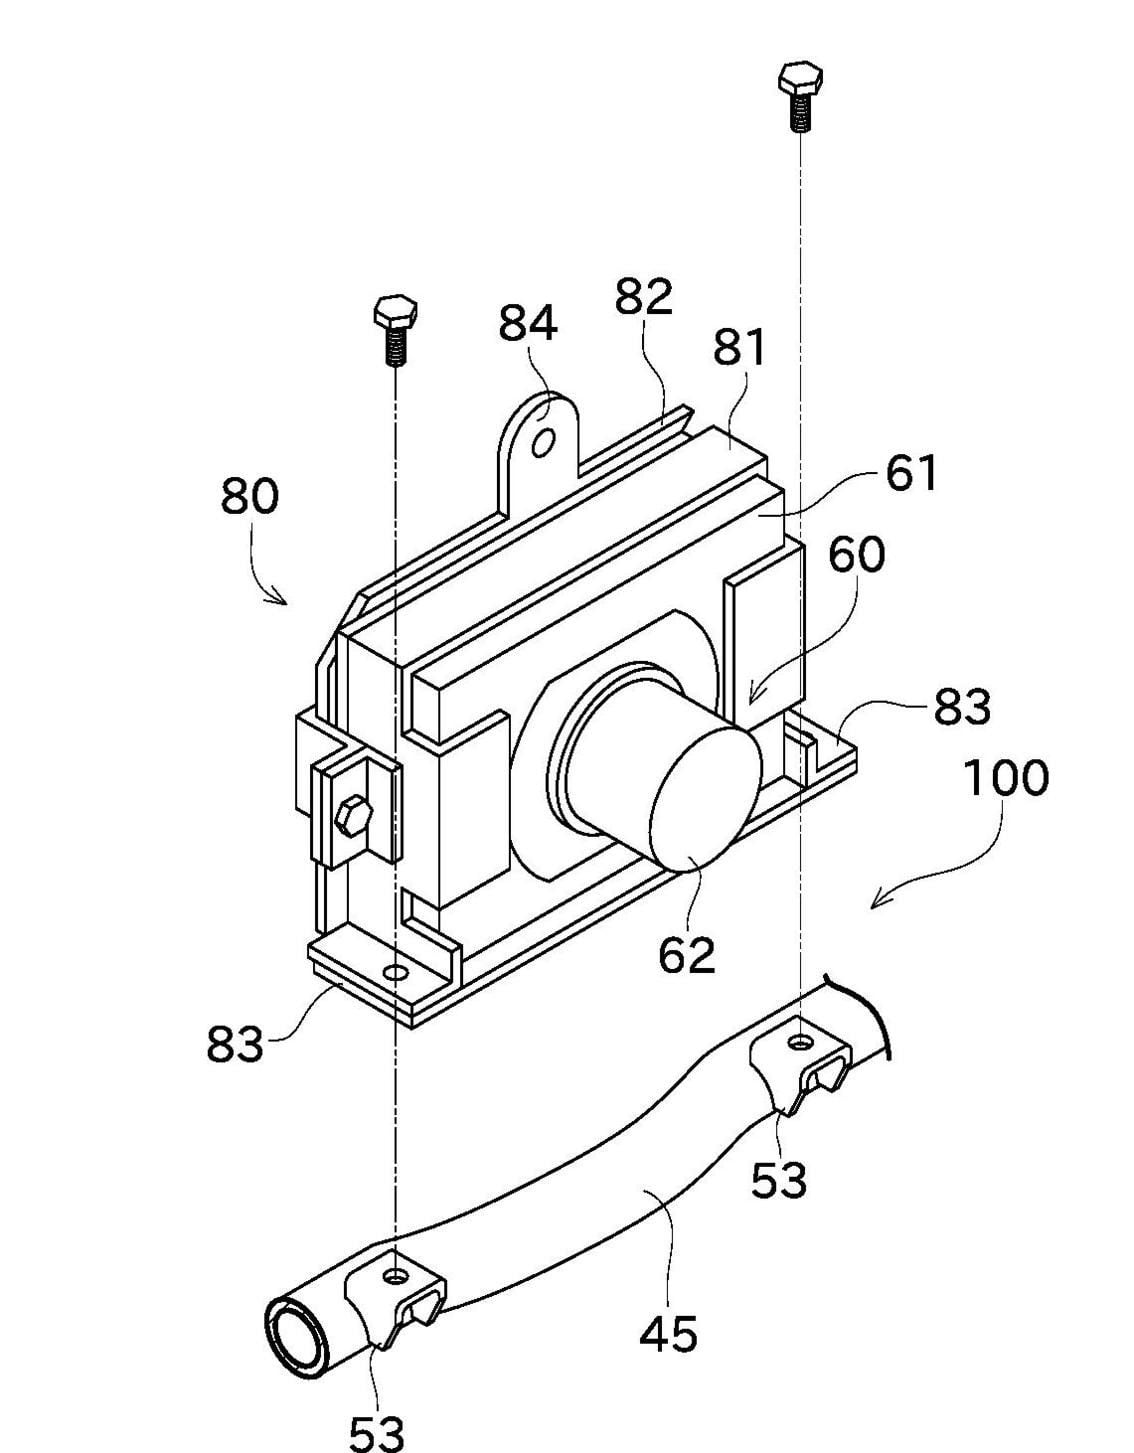 Patents suggest the camera system is designed to be fitted to future models in the most simple manner possible.